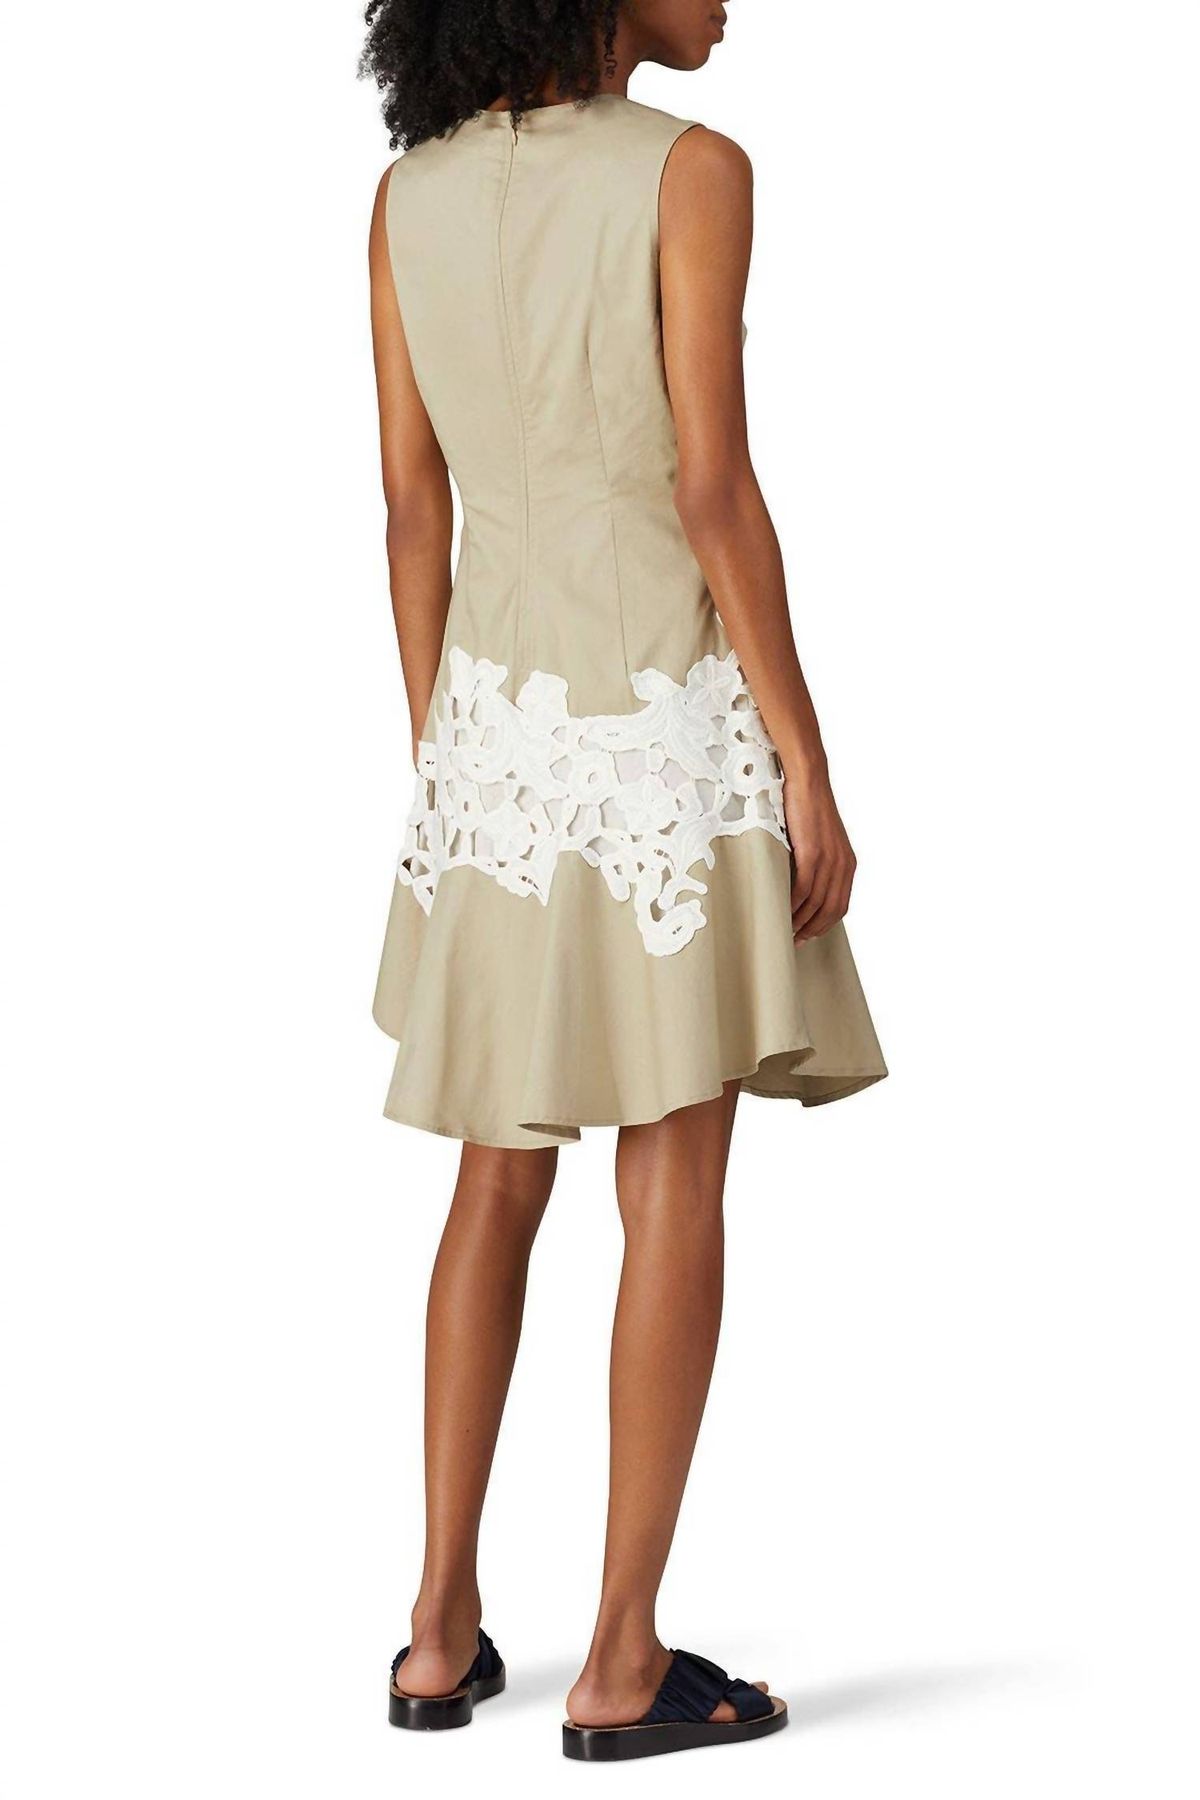 Style 1-3036452524-1572-1 Derek Lam 10 Crosby Plus Size 42 Lace Nude Cocktail Dress on Queenly